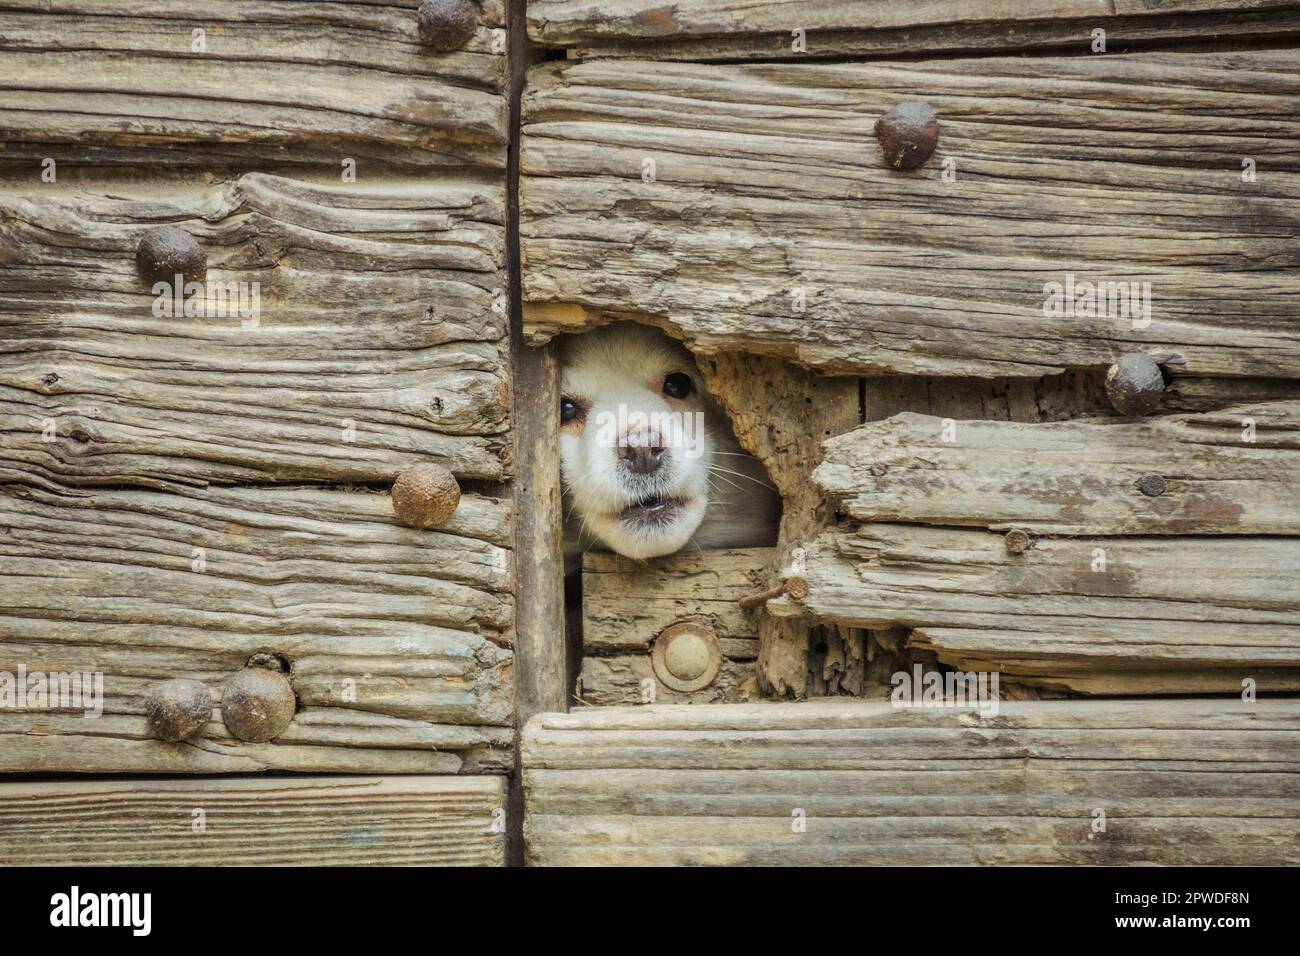 Cute white dog looking at the camera through a crack in an old broken wooden door Stock Photo